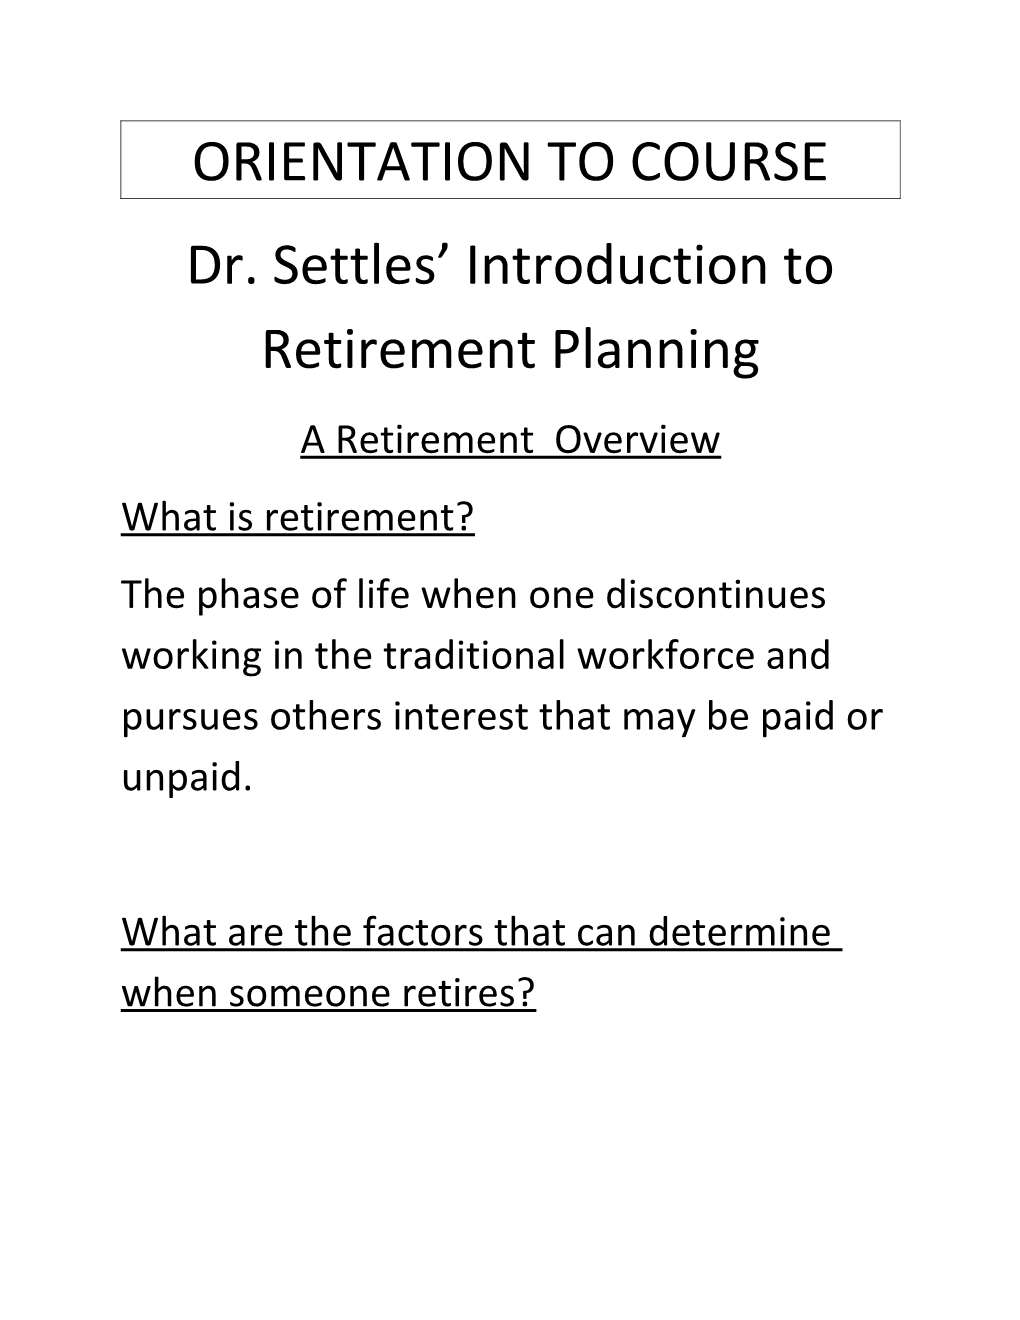 Dr. Settles Introduction to Retirement Planning